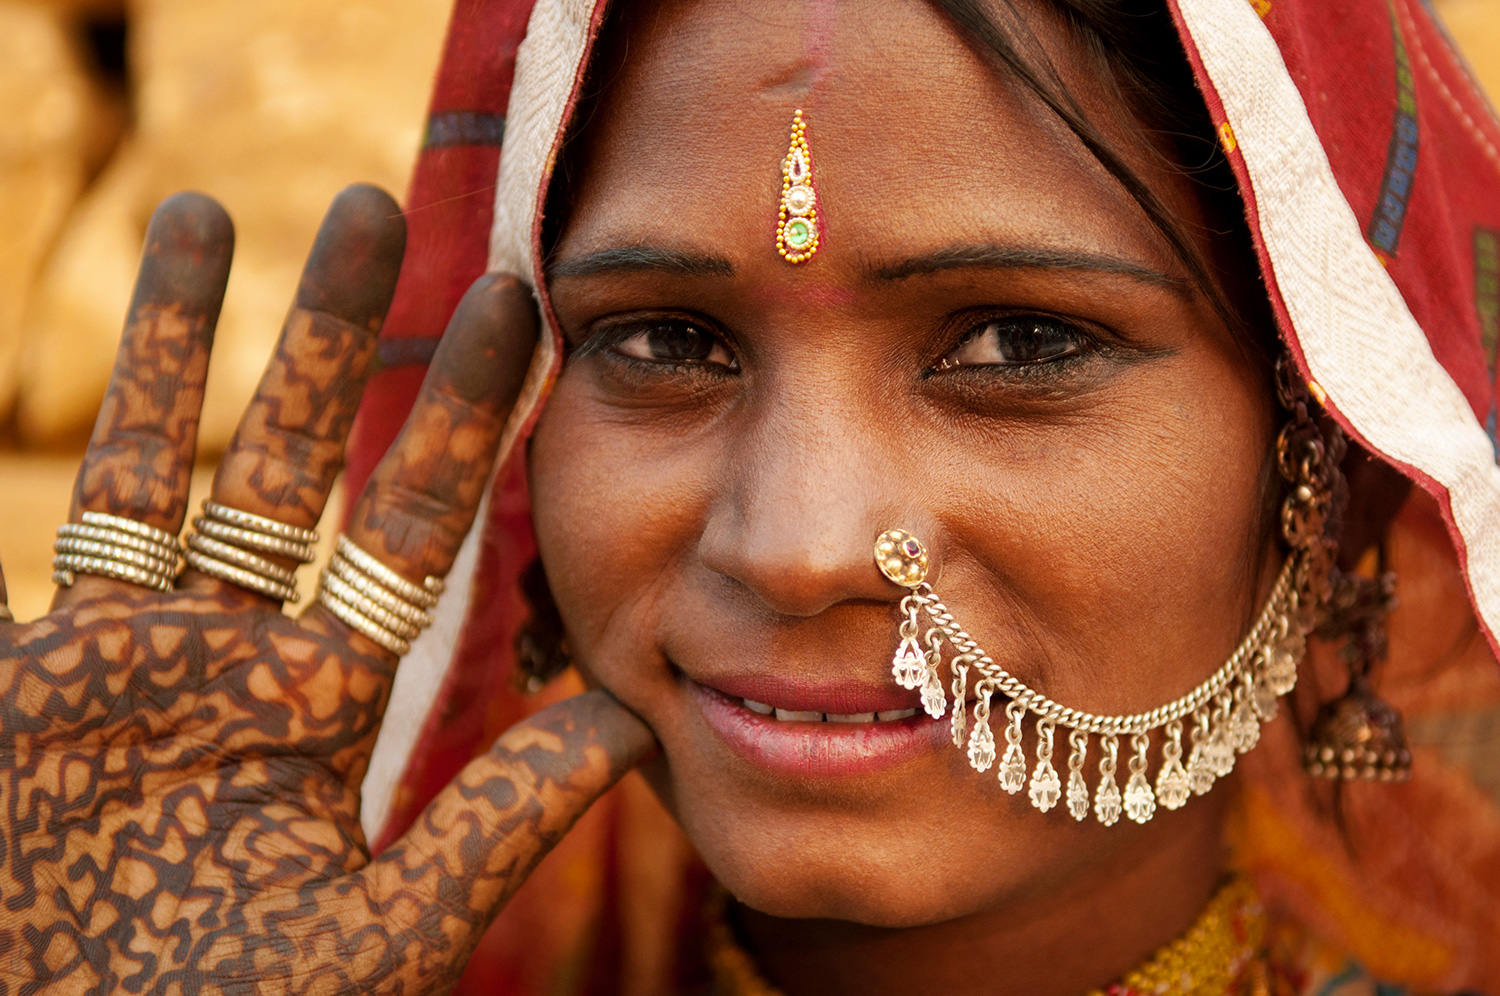 Portrait-of-a-Rajasthan-woman-with-henna-tattoo